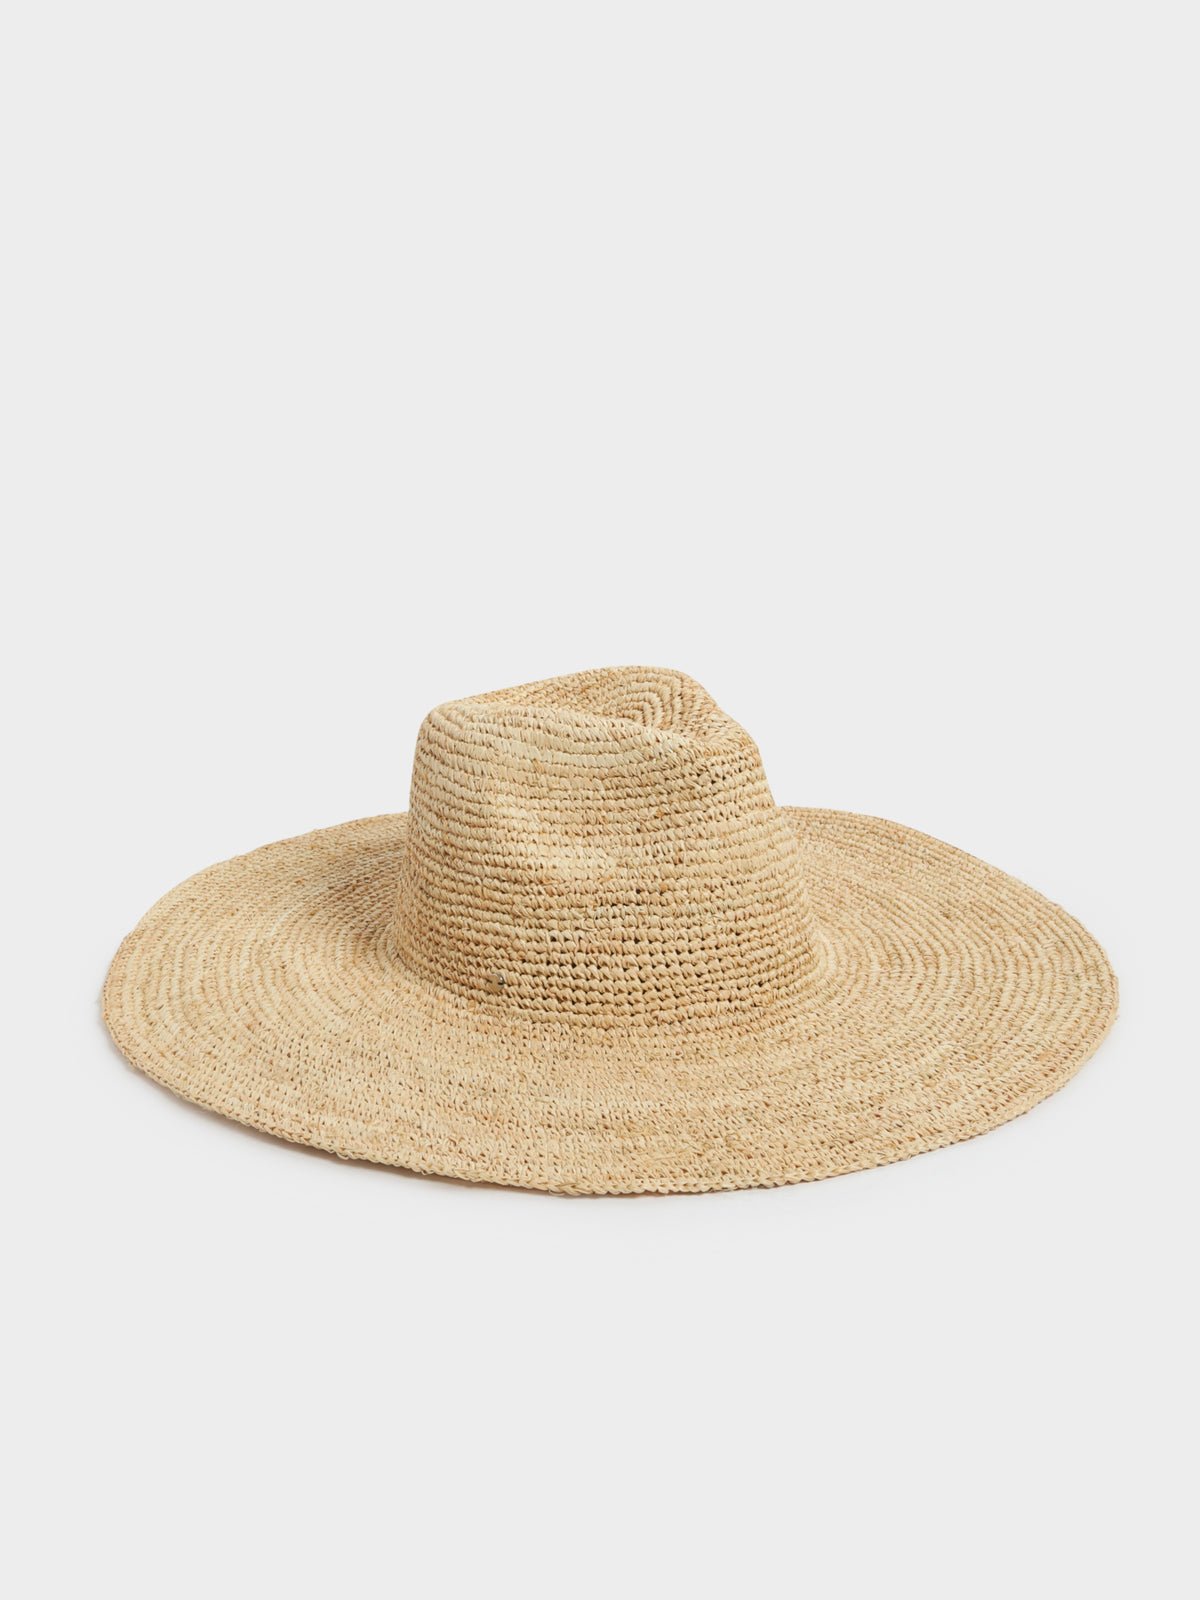 Cassis Straw Hat in Natural